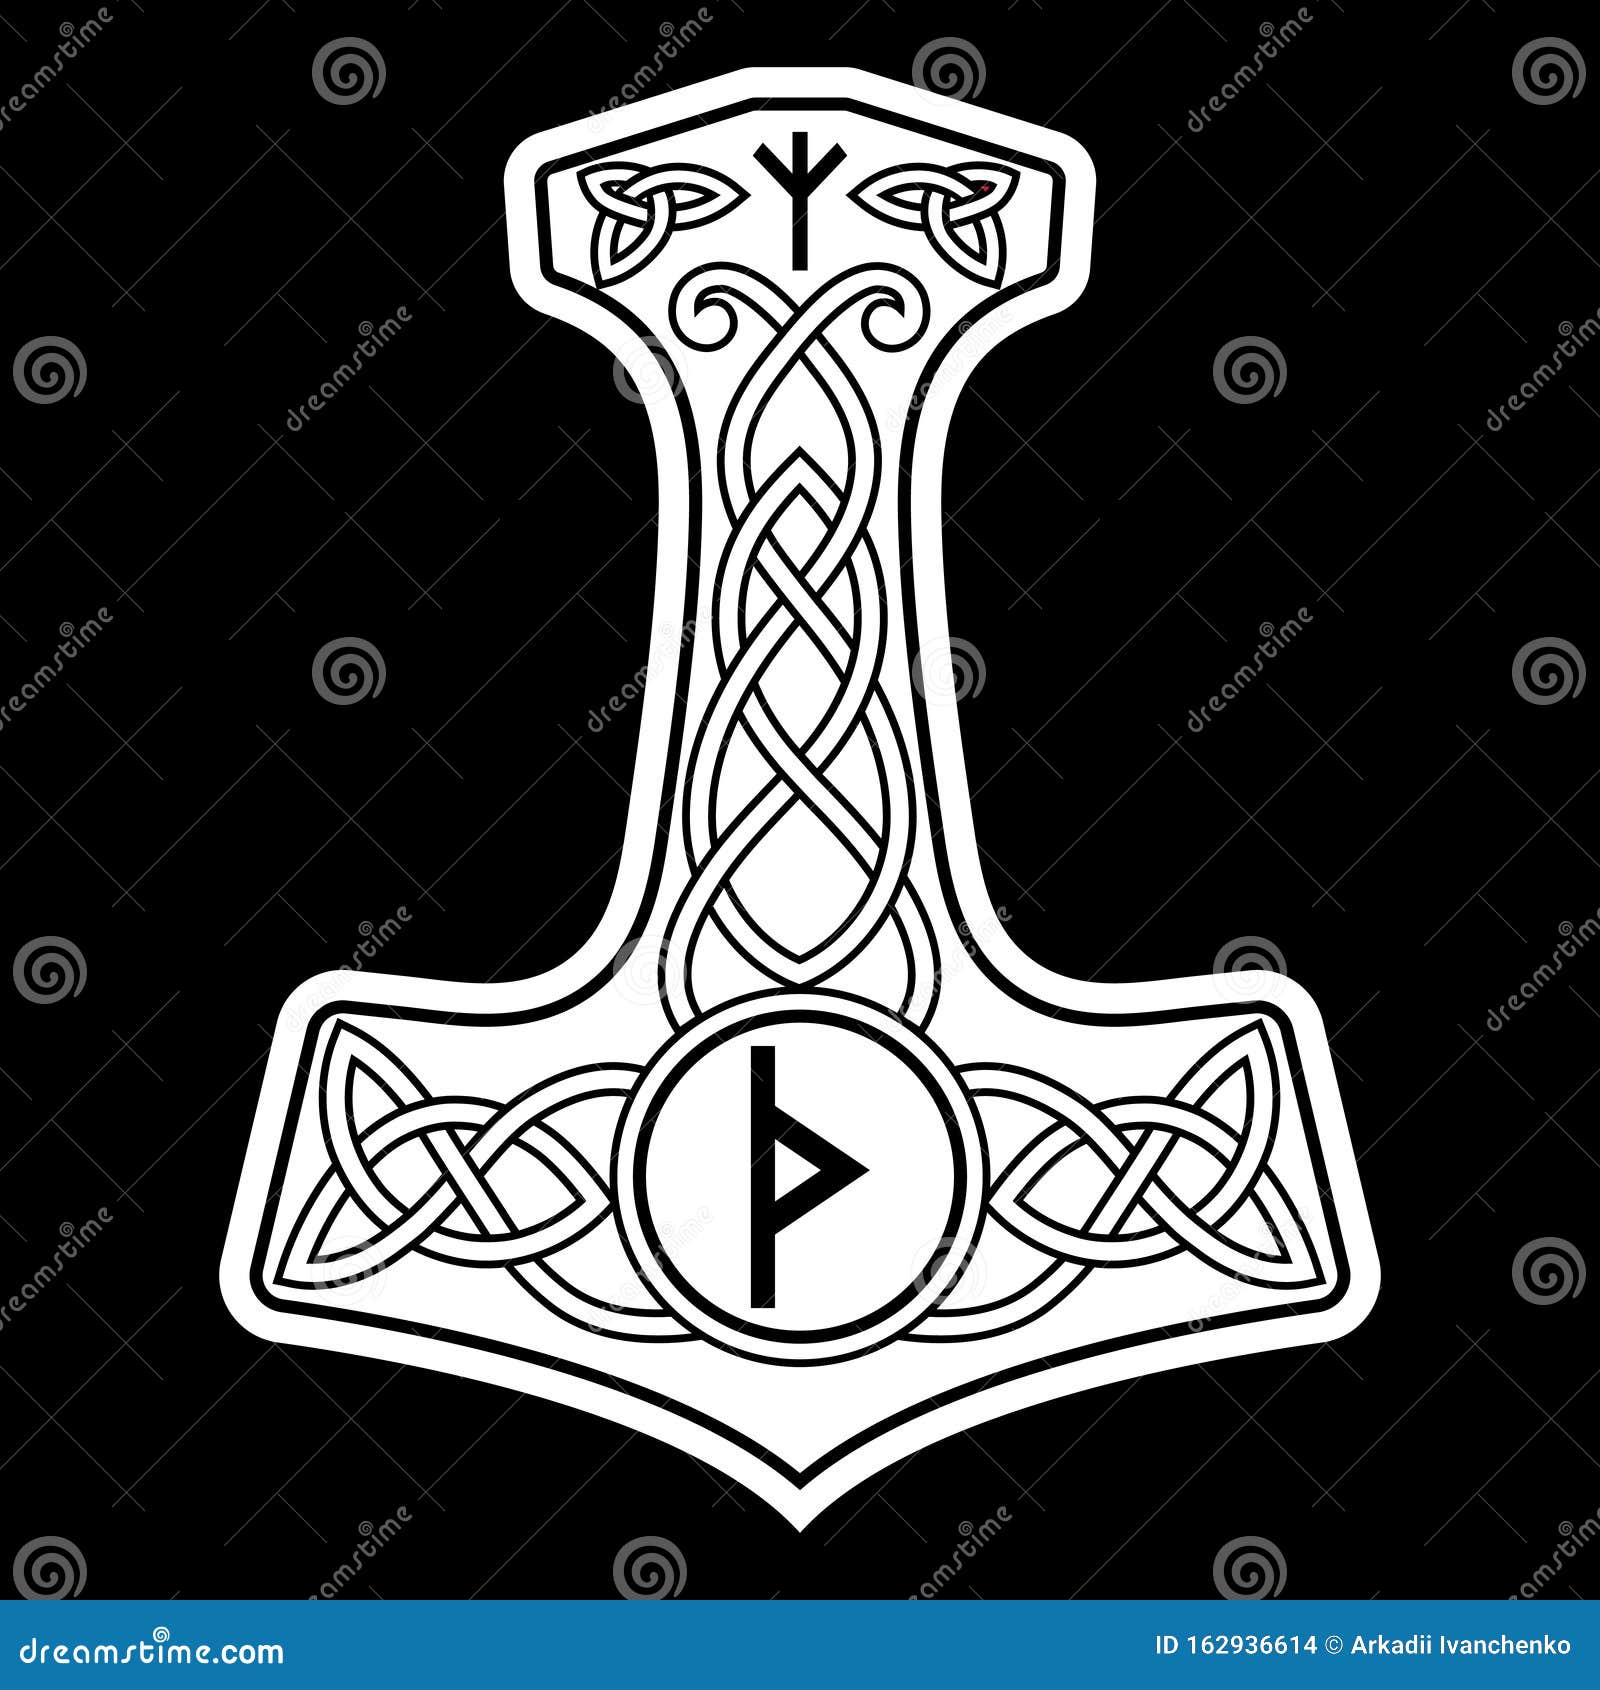 101 Amazing Mjolnir Tattoo Designs You Need To See! | Mjolnir tattoo, Thor  tattoo, Hammer tattoo